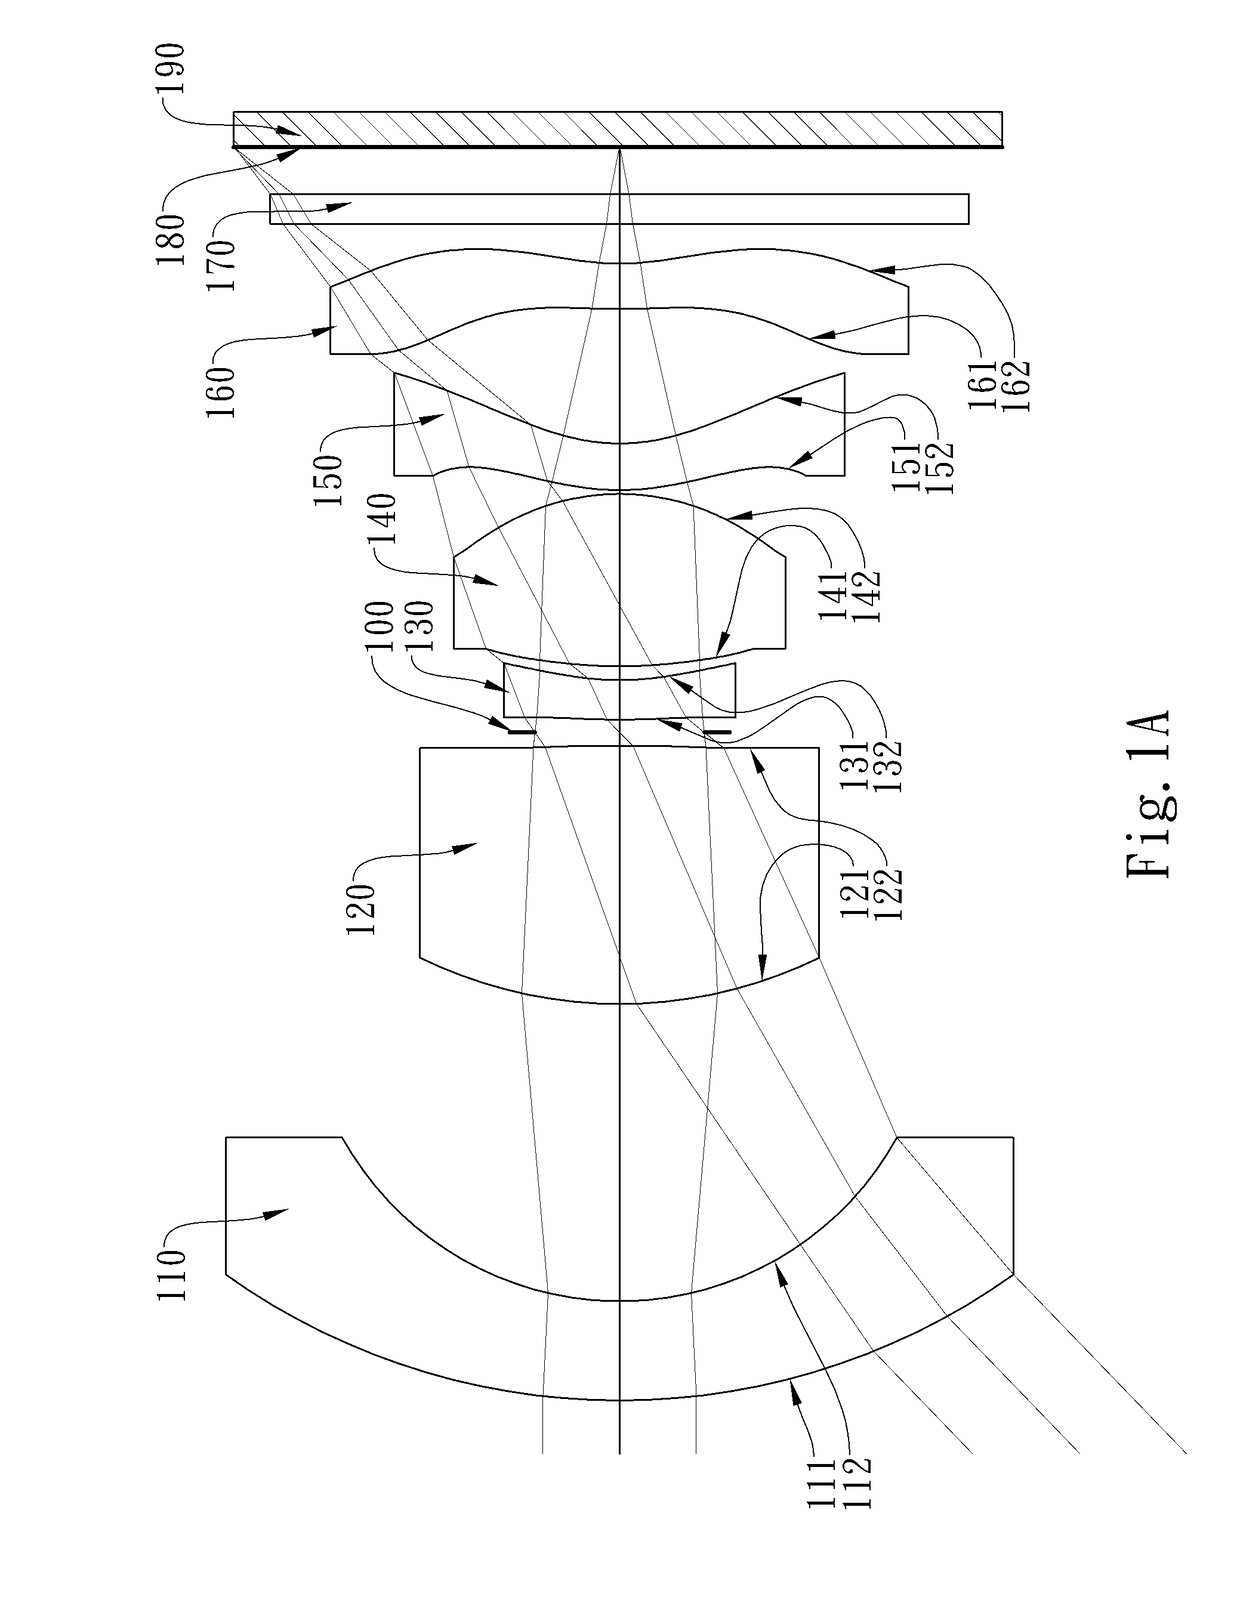 Optical image capturing lens assembly, imaging apparatus and electronic device